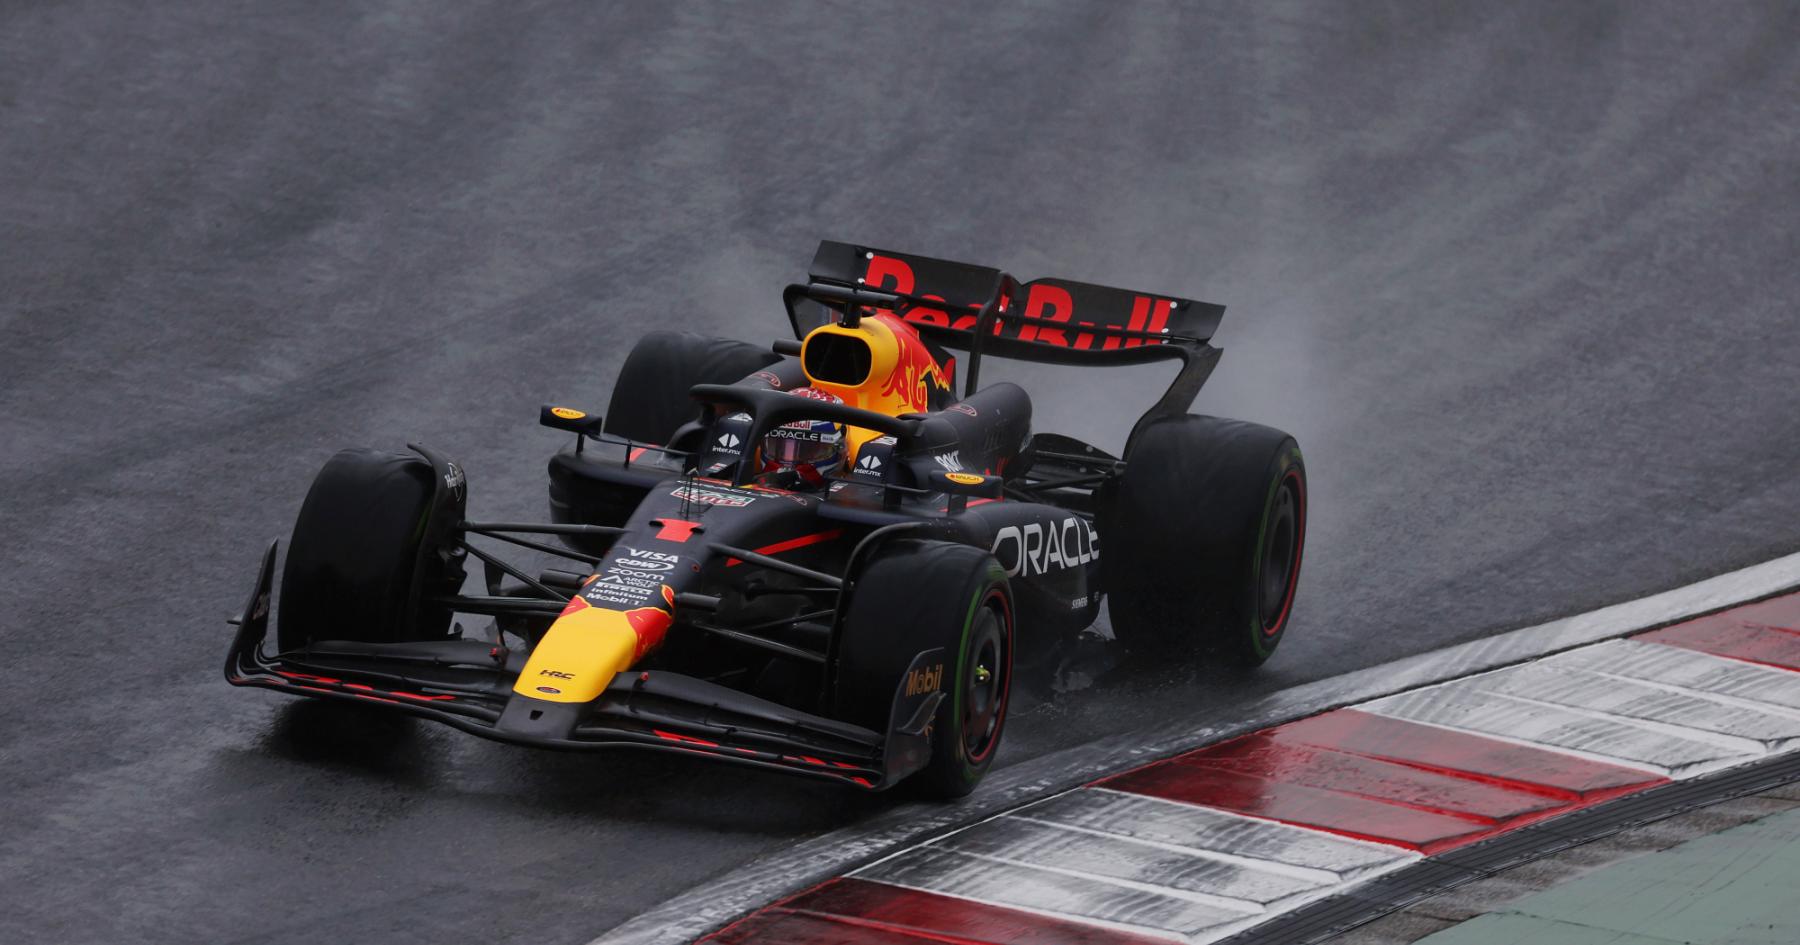 Storm Clouds Loom over the Chinese Grand Prix: Will Rain Play Spoiler?